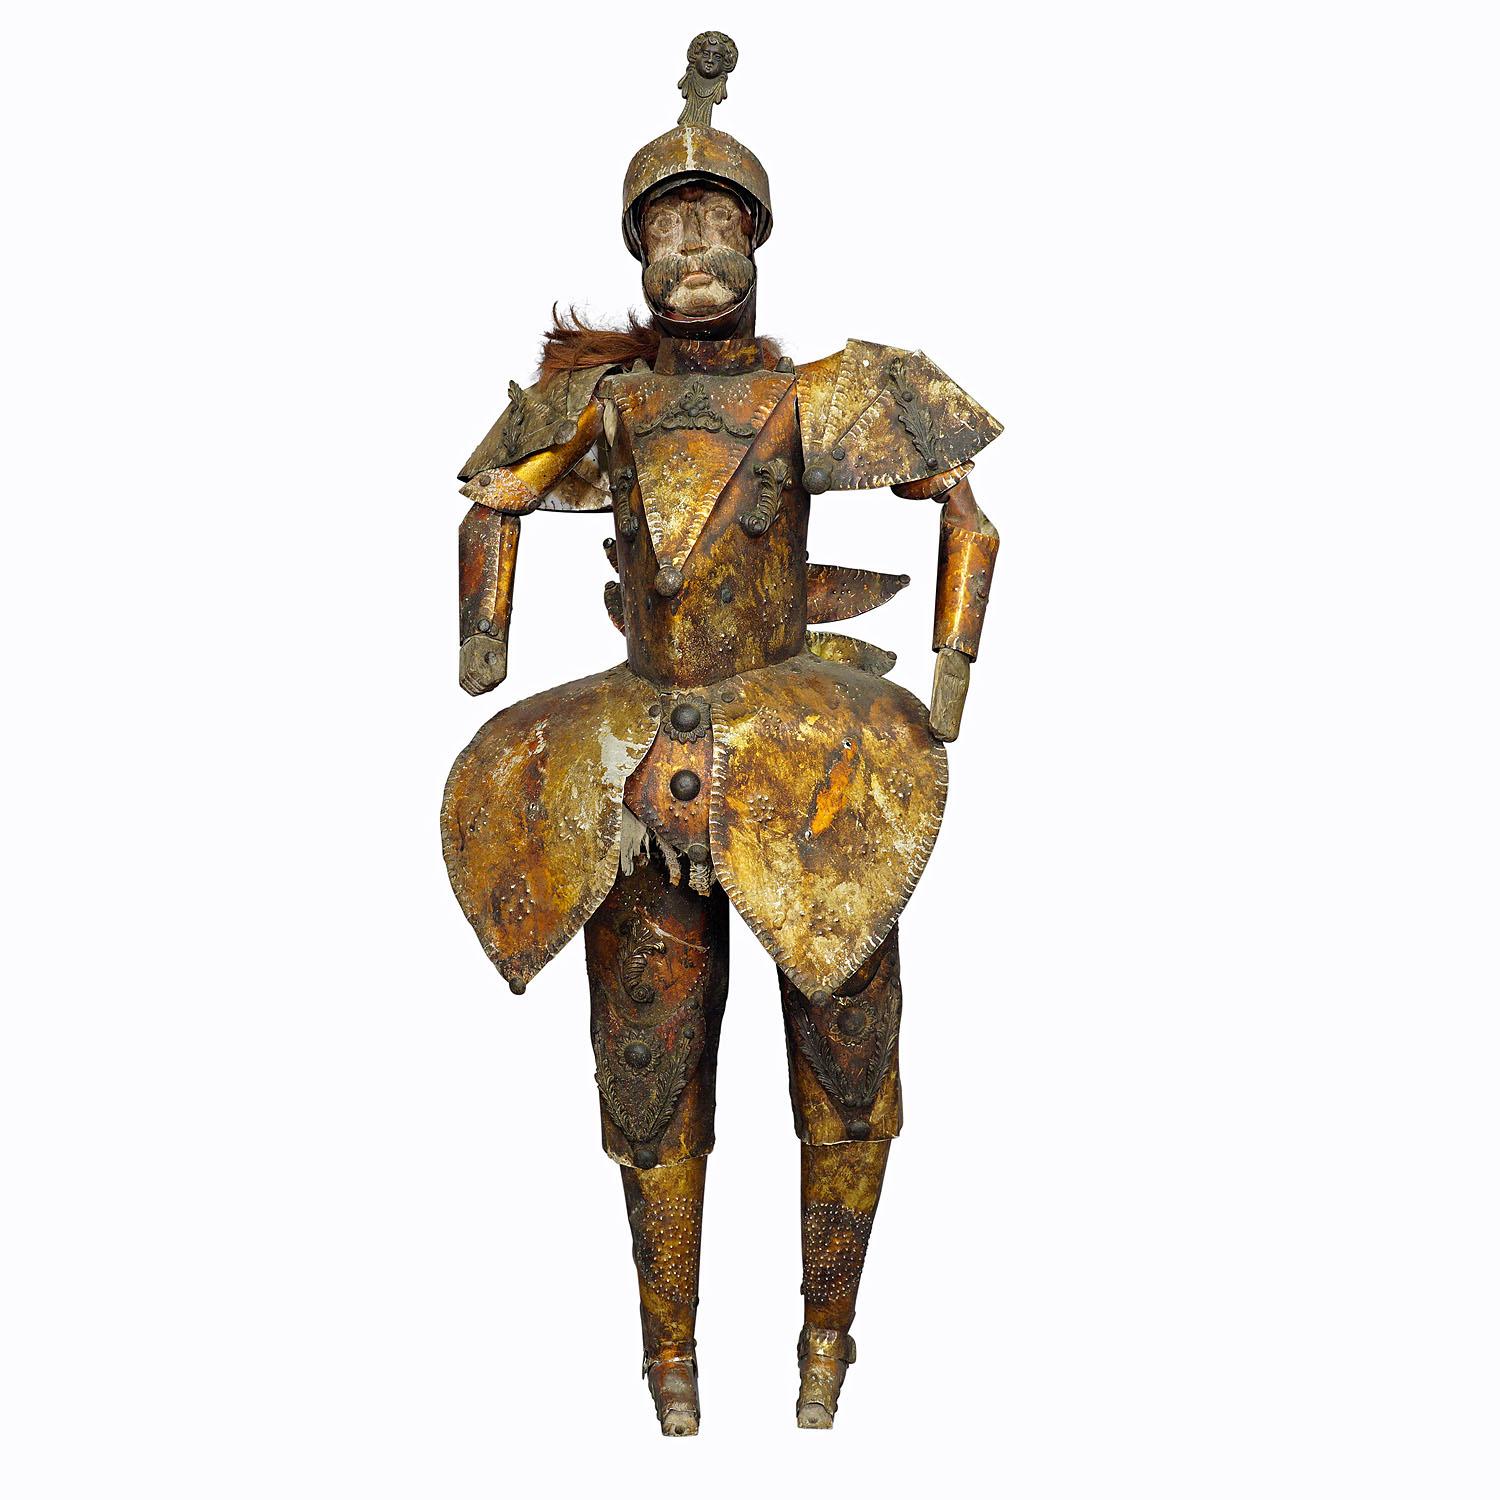 Antique Sicilian Opera dei Pupi Theater Marionette, ca. 1930s

A large Sicilian theater (Opera dei Pupi) marionette, which is made of tin, wood and canvas ca. 1930s.

The Sicilian Puppet Theater developed in the first half of the 19th century. It